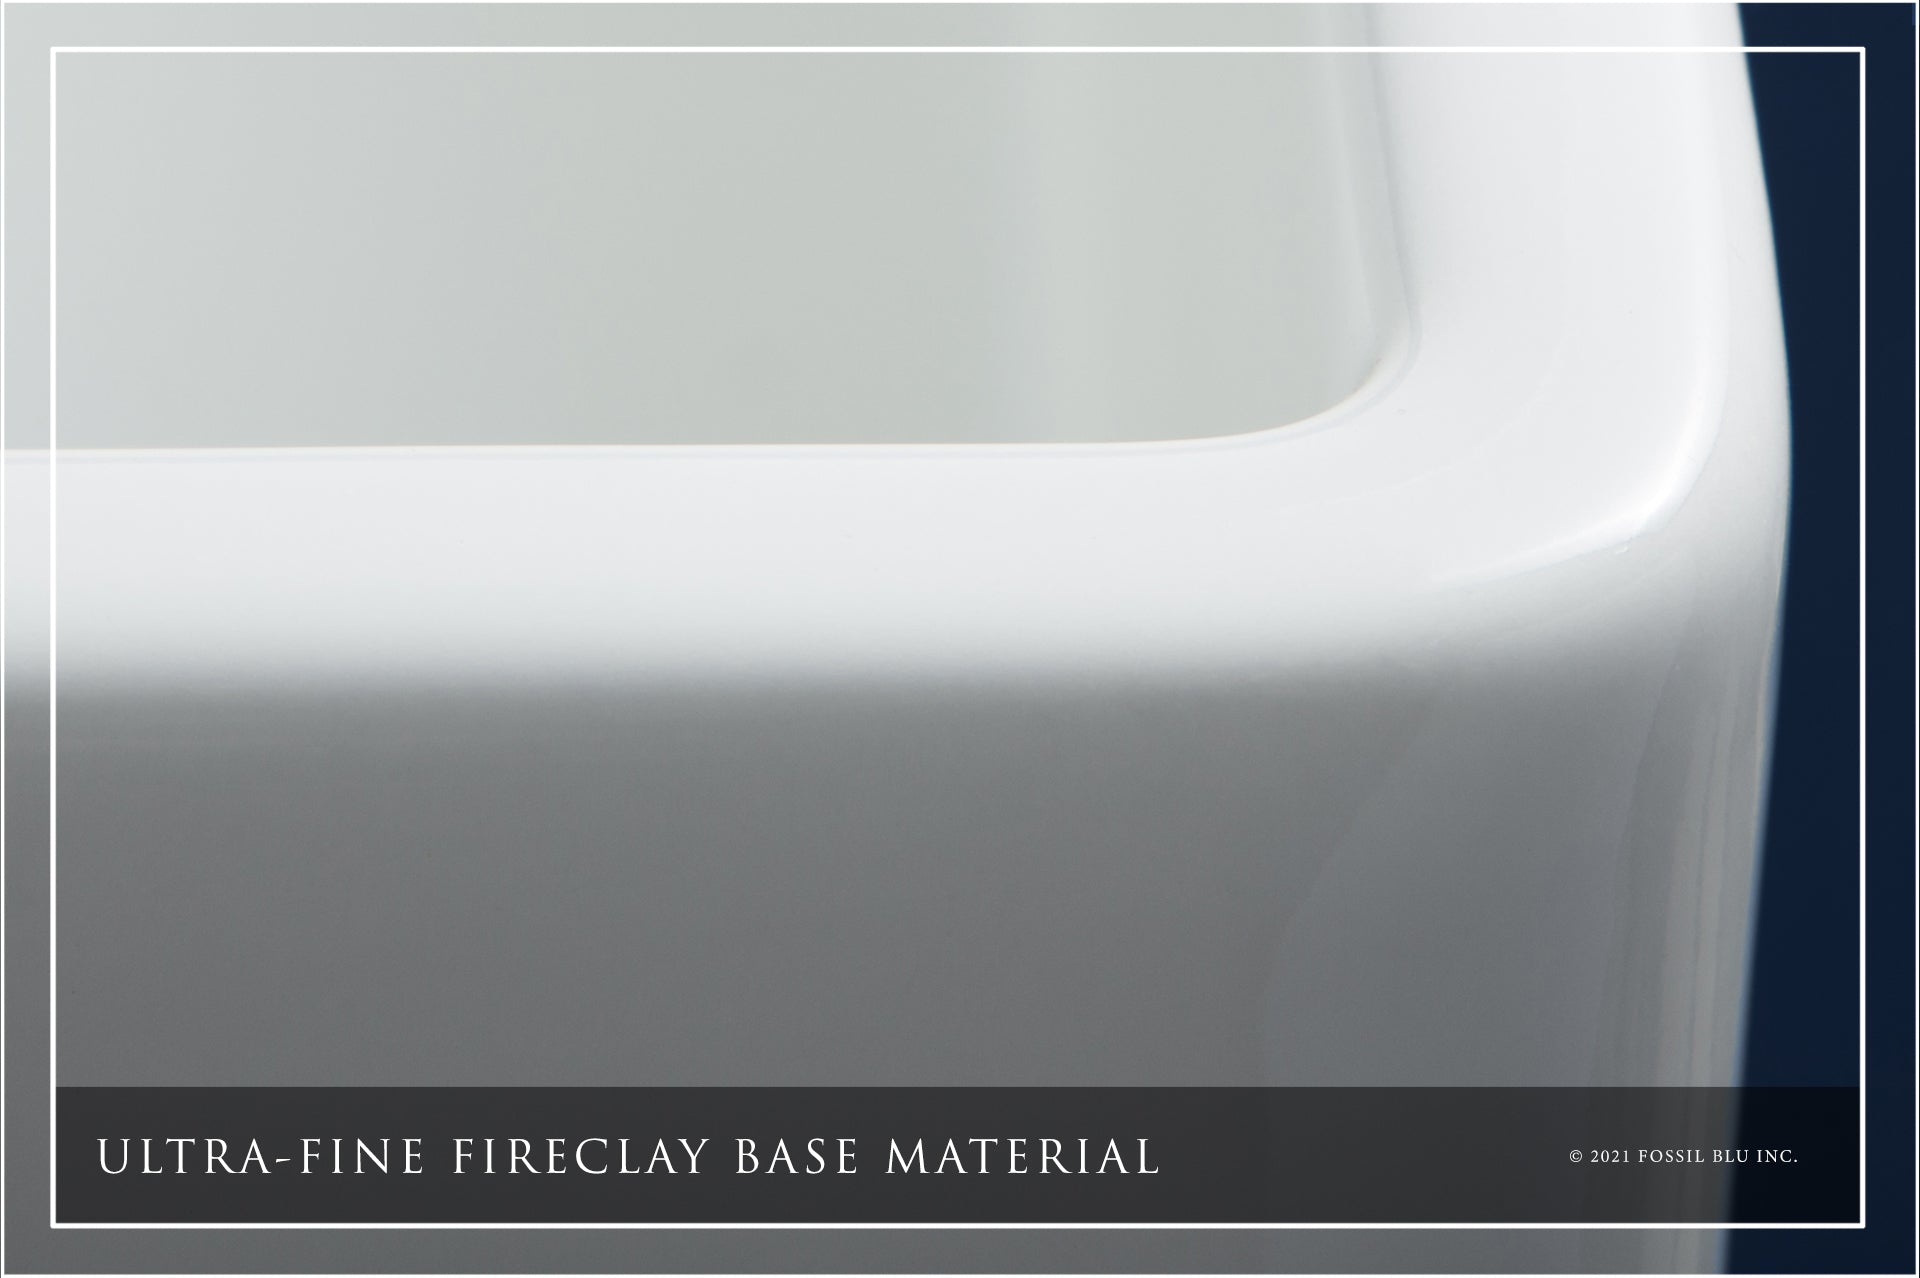 FSW1001PN LUXURY 30-INCH SOLID FIRECLAY FARMHOUSE SINK IN WHITE, POLISHED NICKEL ACCS, FLAT FRONT